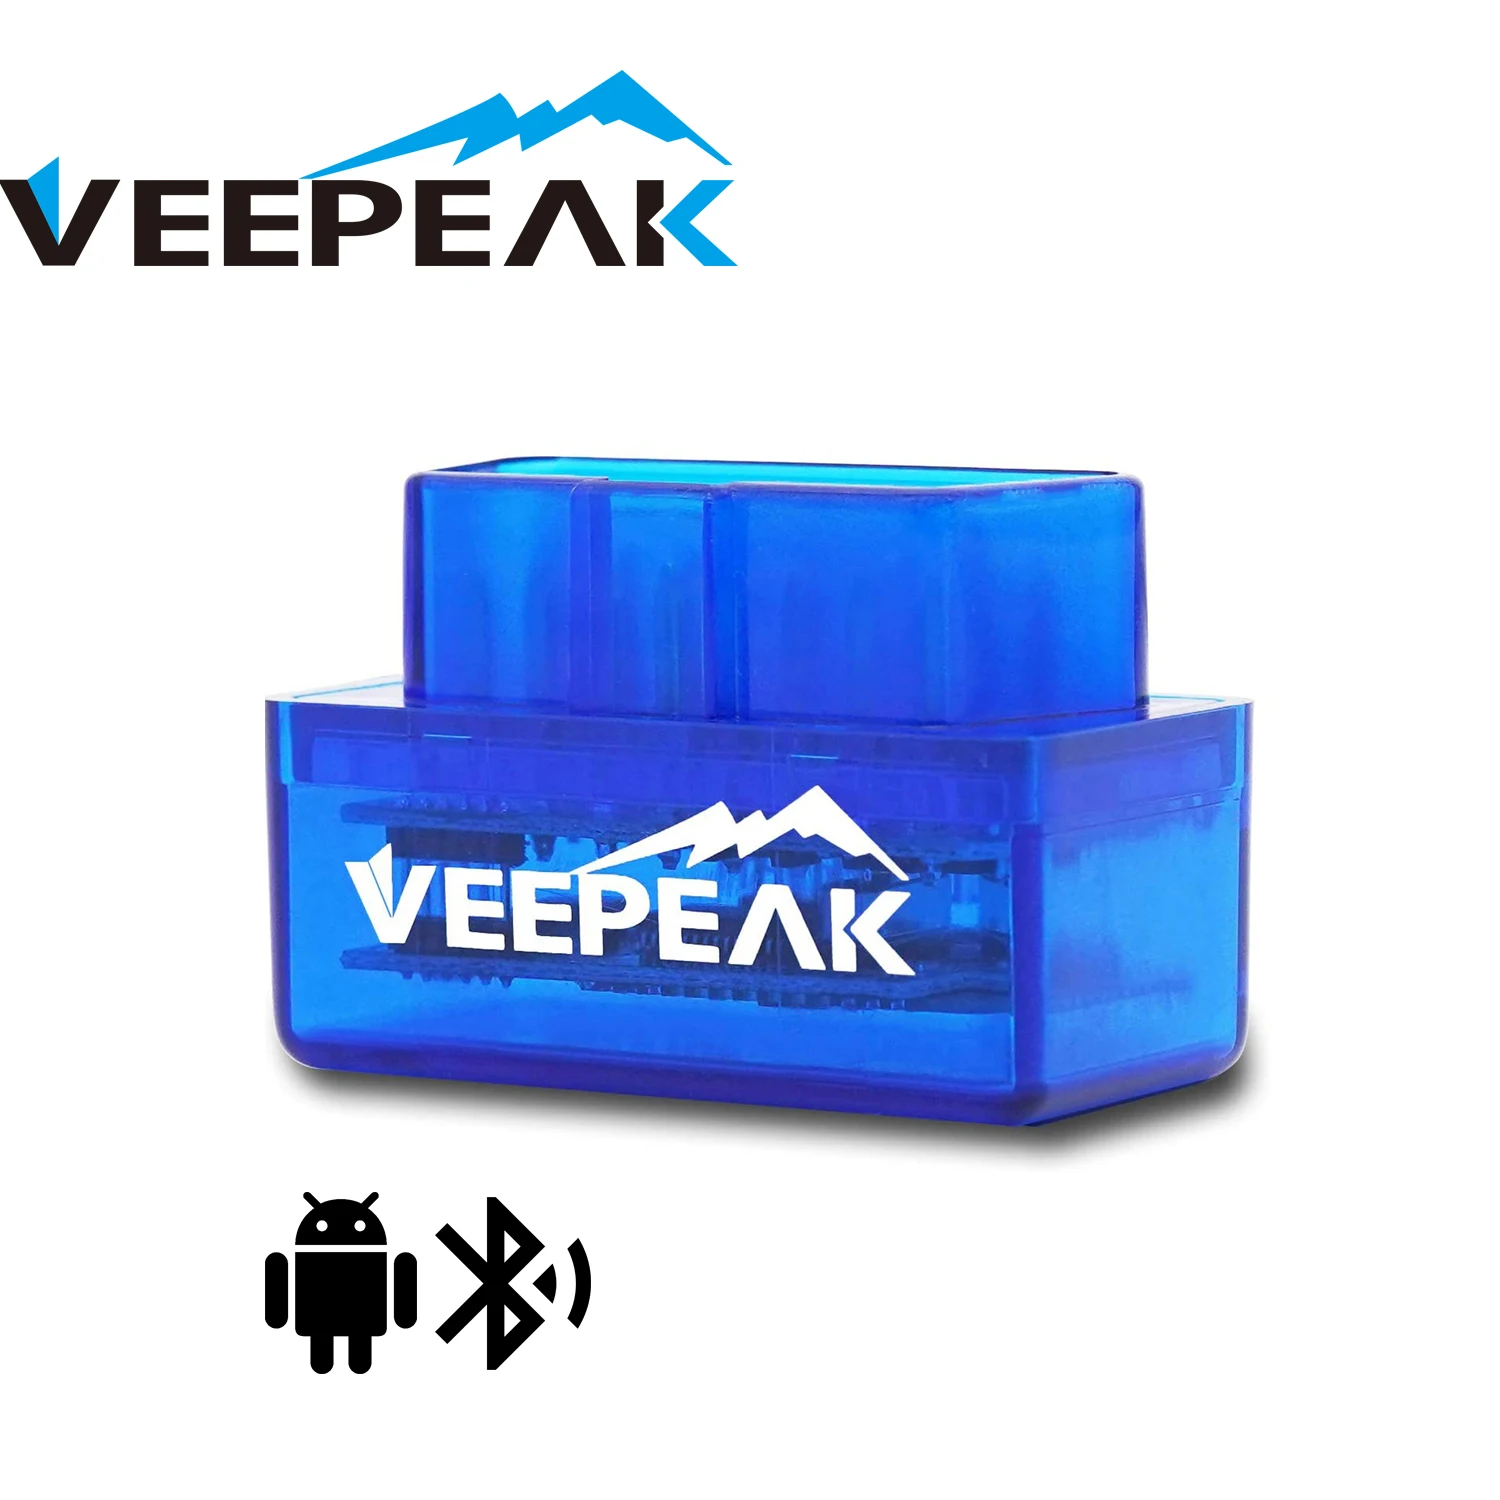 Veepeak Mini Bluetooth OBD2 Scanner for Android, Car OBD II Diagnostic Scan Tool Check Engine Light Code Reader, Supports Torque